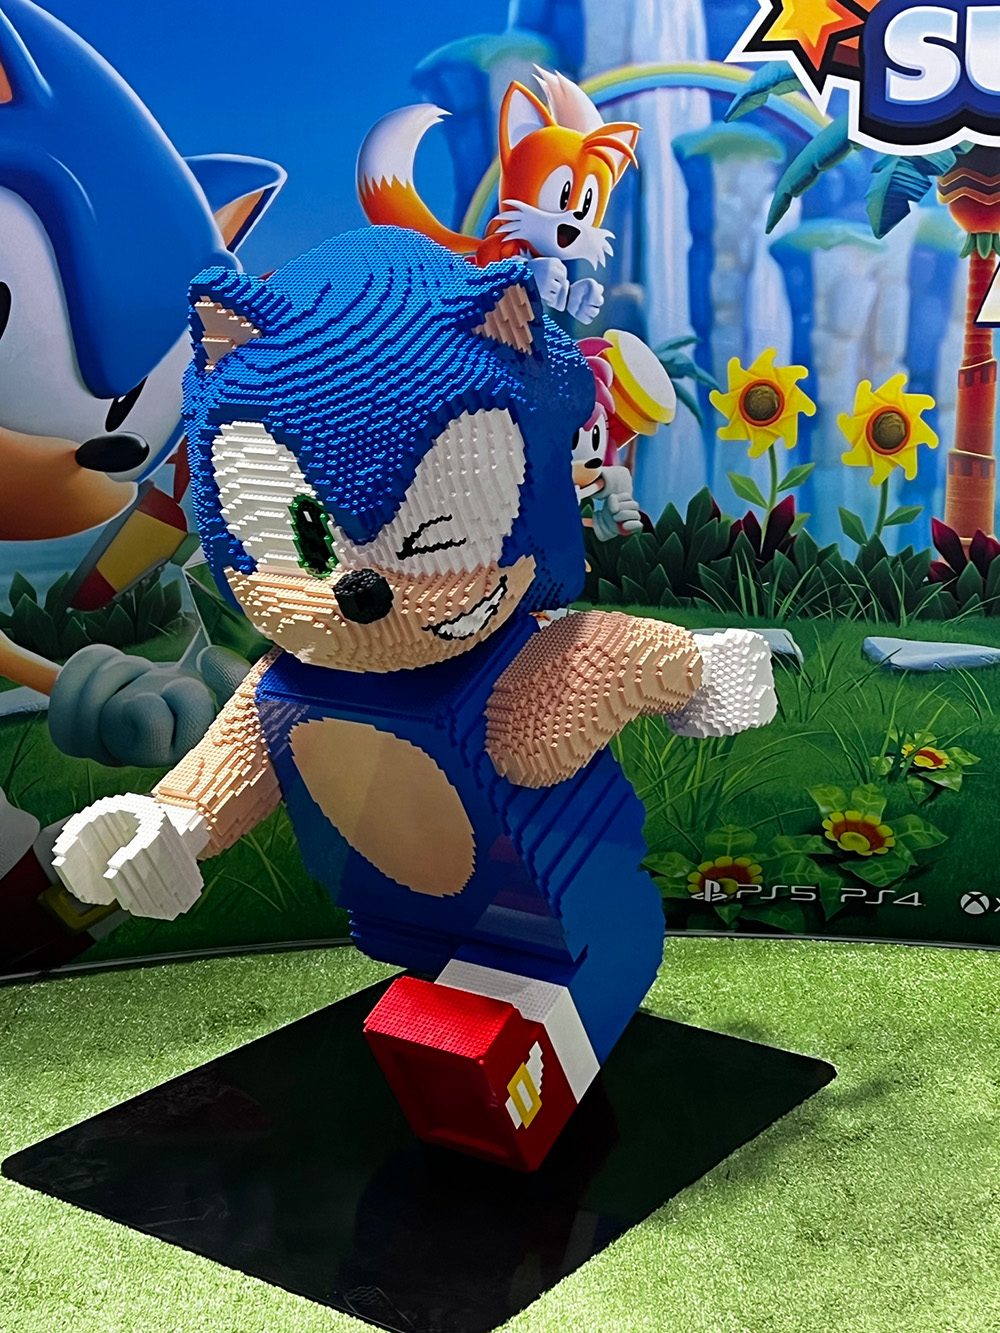 Giant Lego Sonic to be revealed at PAX Aus 2023